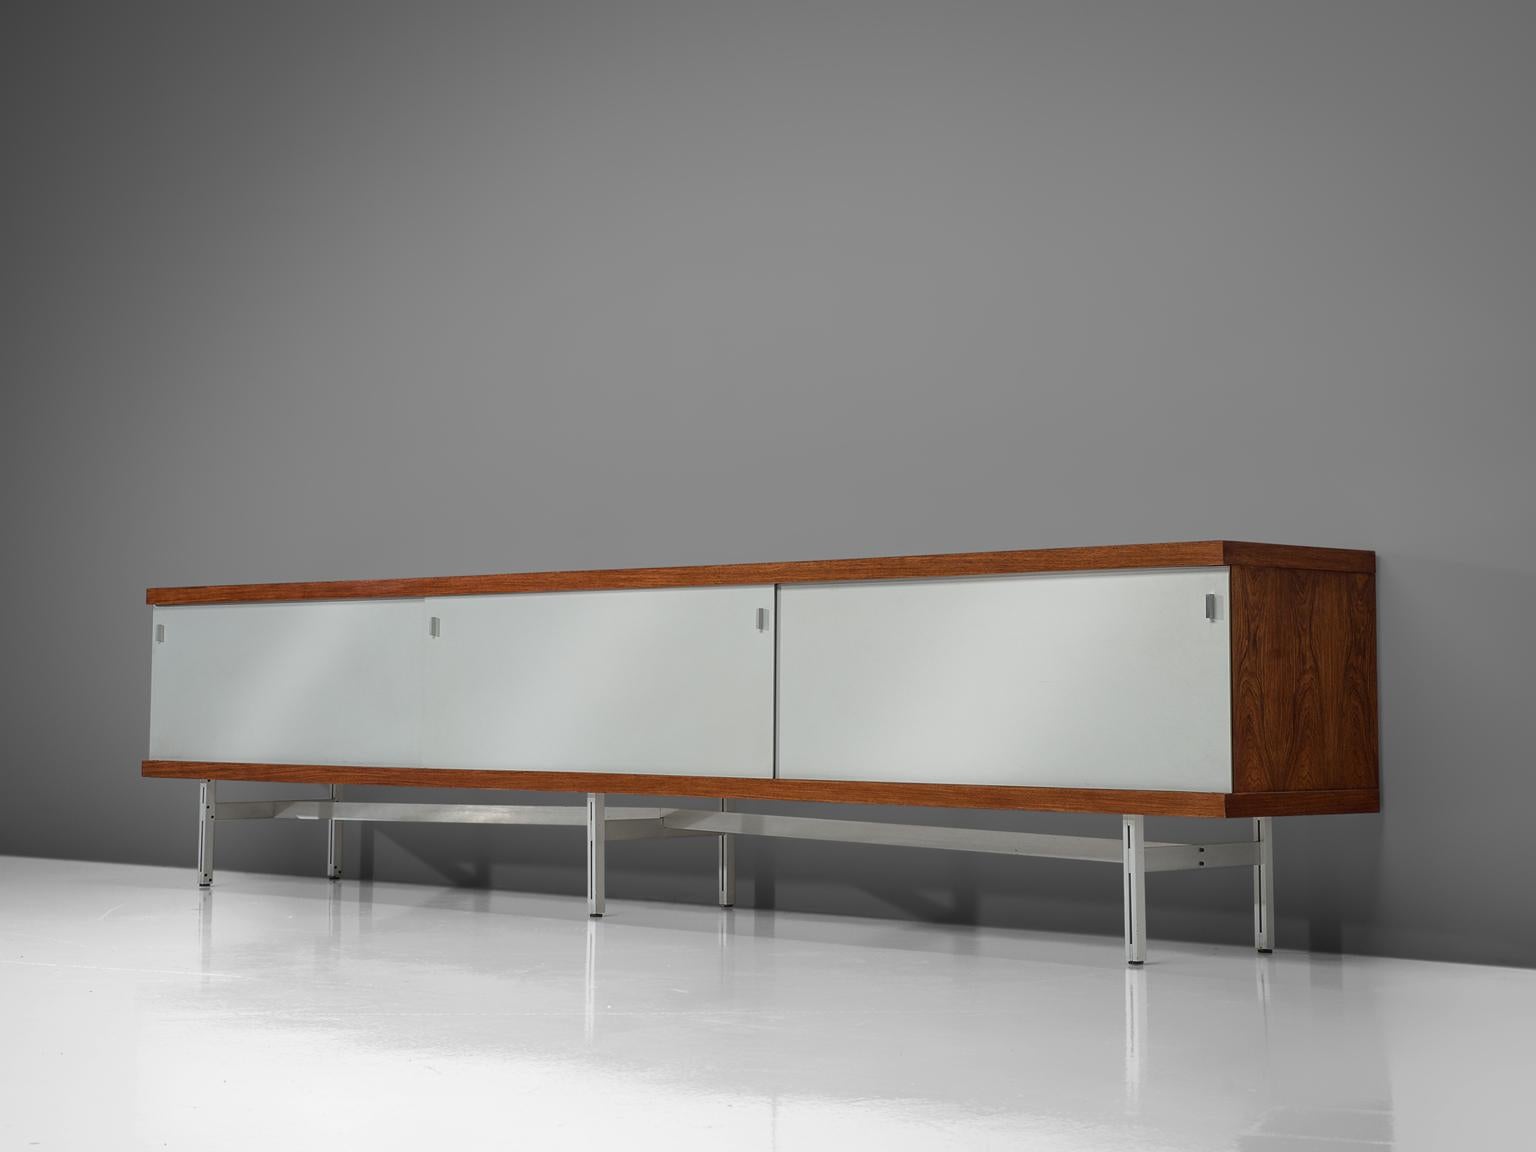 Horst Brüning for Behr, credenza, off white to grey plywood, rosewood, metal, Germany, 1960.

This simplistic geometric credenza holds a rosewood case and a brushed metal frame. The sliding doors are made of white formica and have geometric grips.